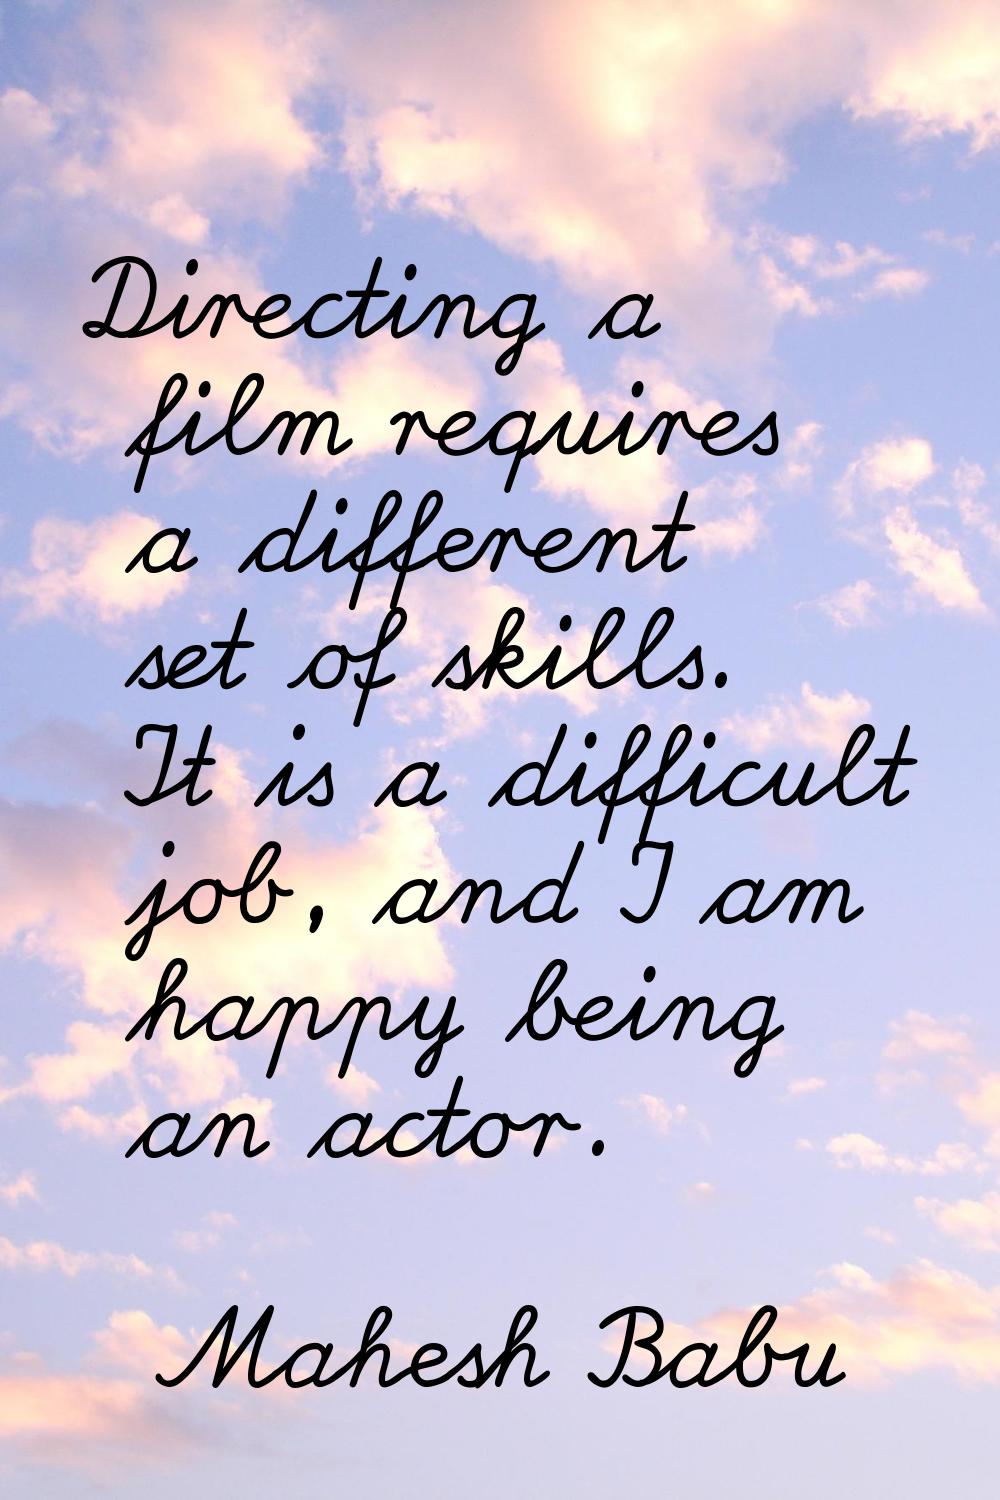 Directing a film requires a different set of skills. It is a difficult job, and I am happy being an